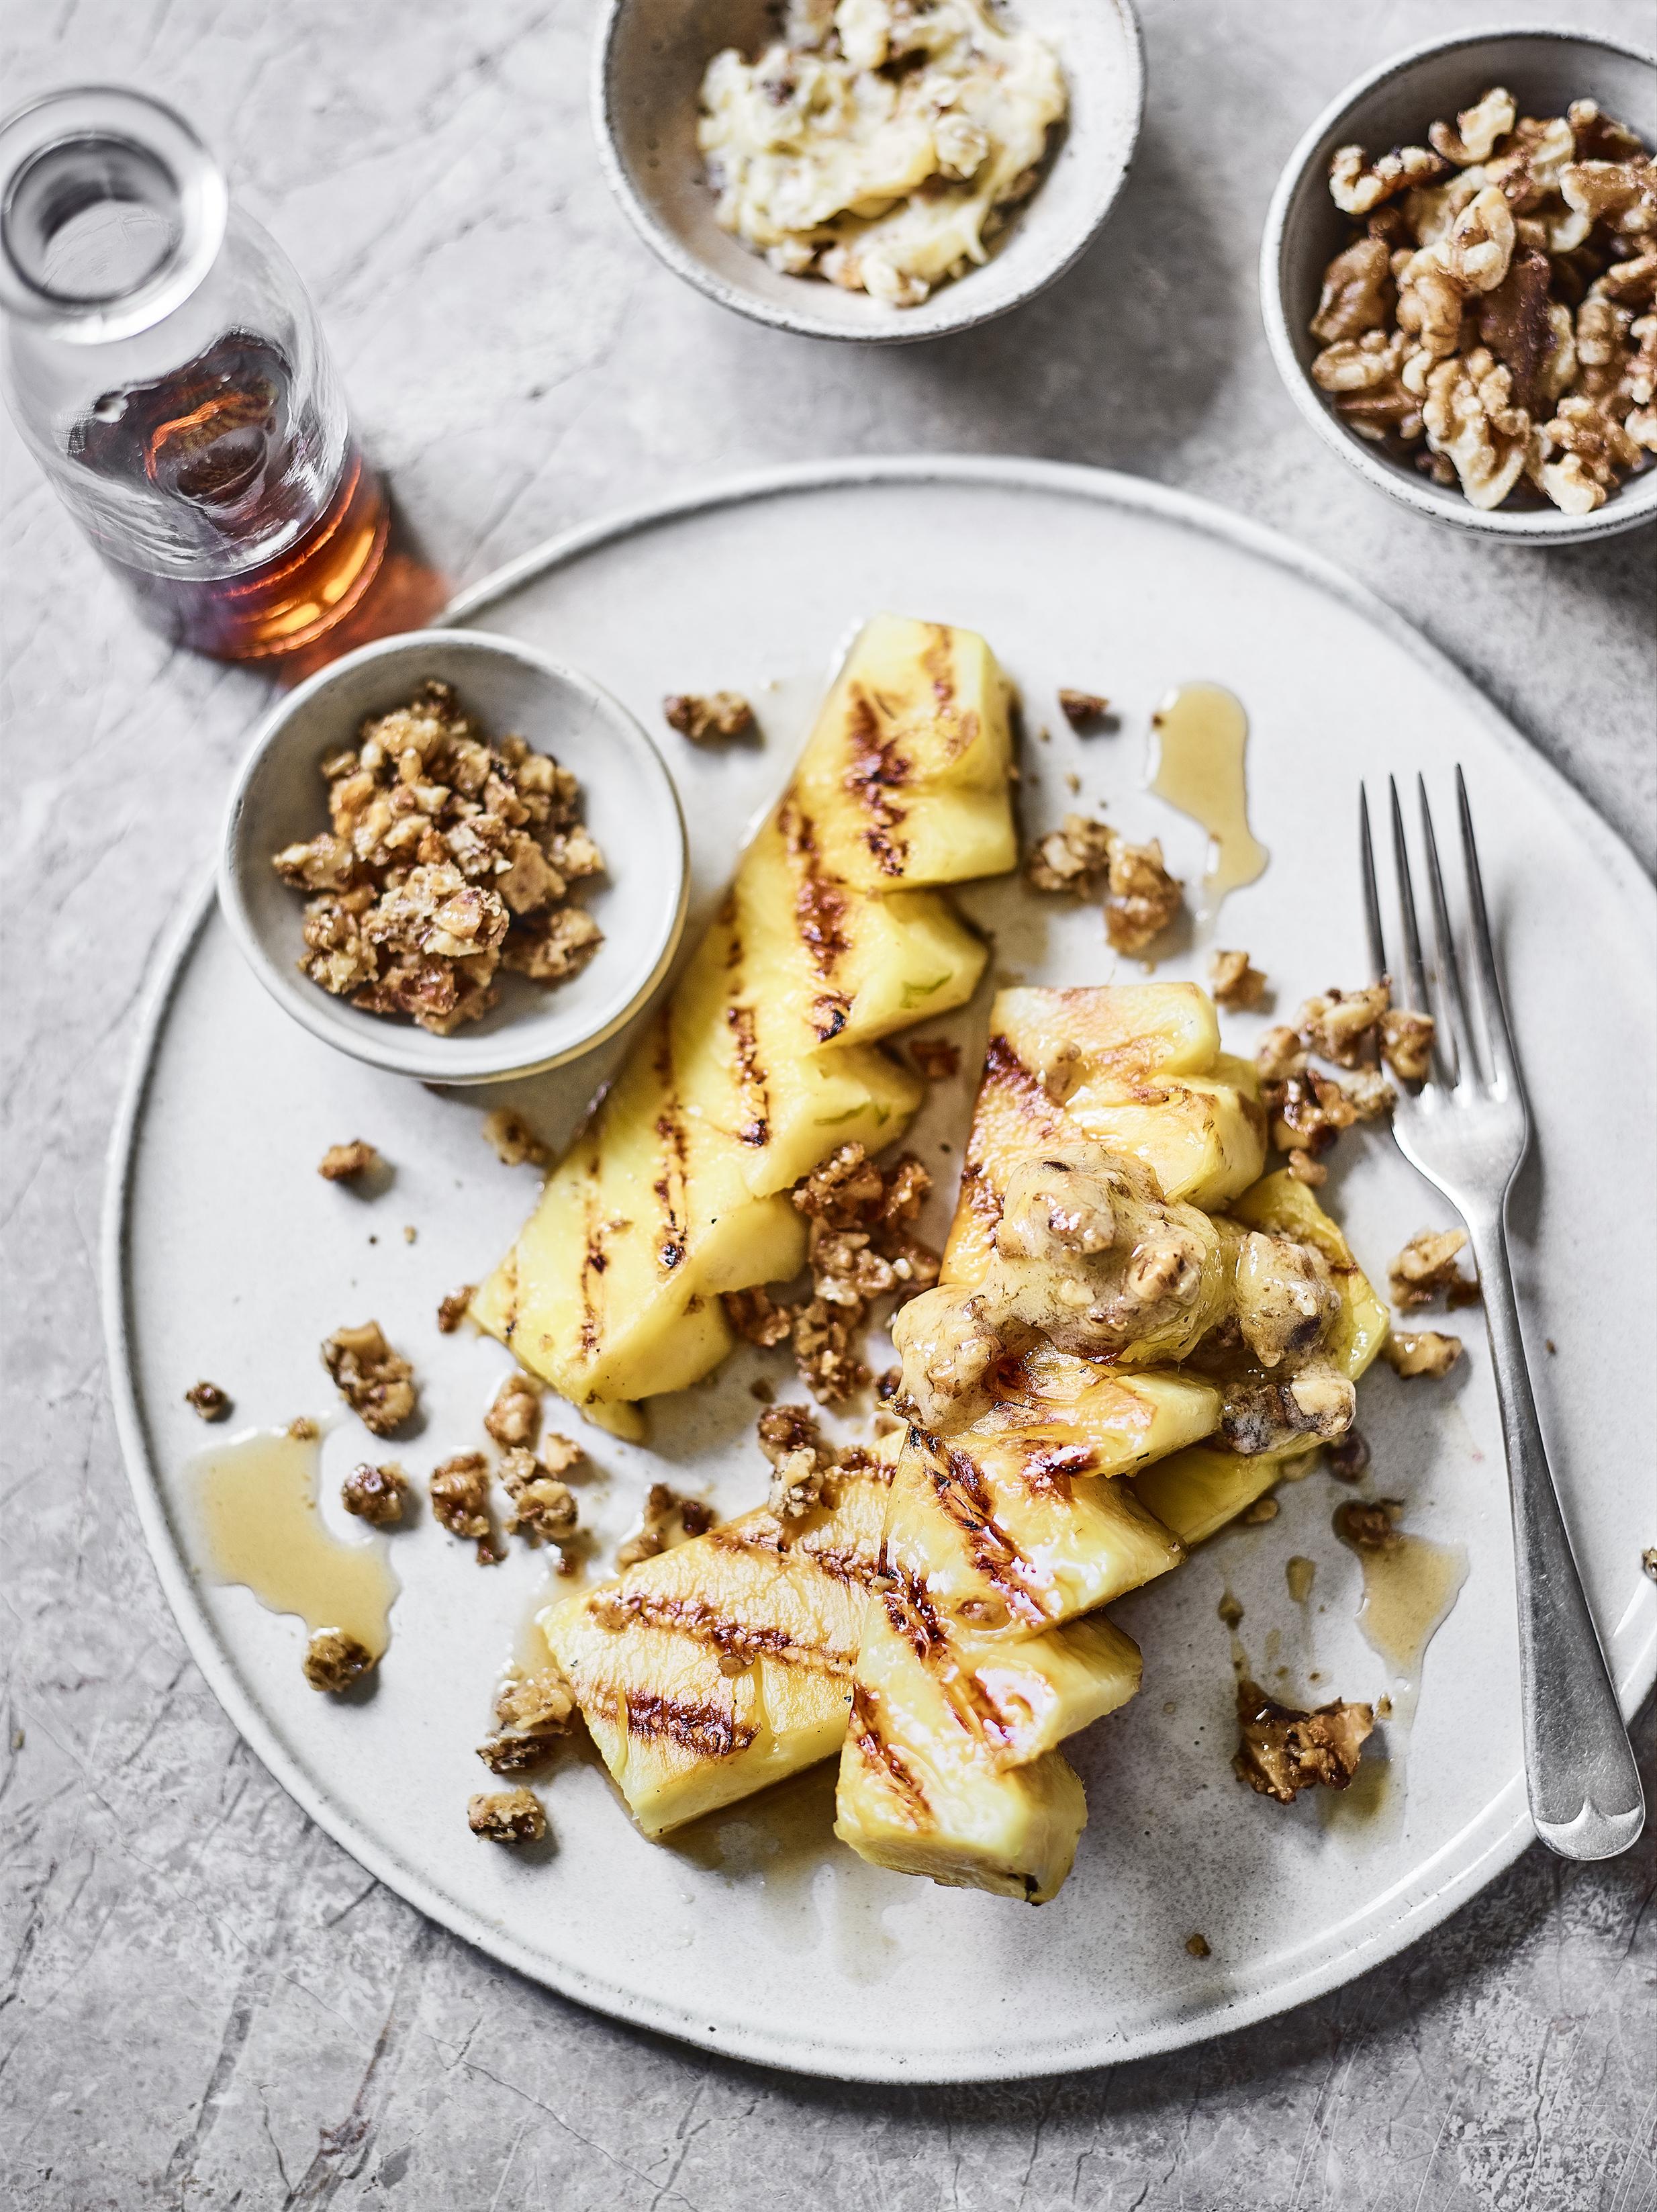 Griddled Pineapple with Walnut Crust(California Walnuts)